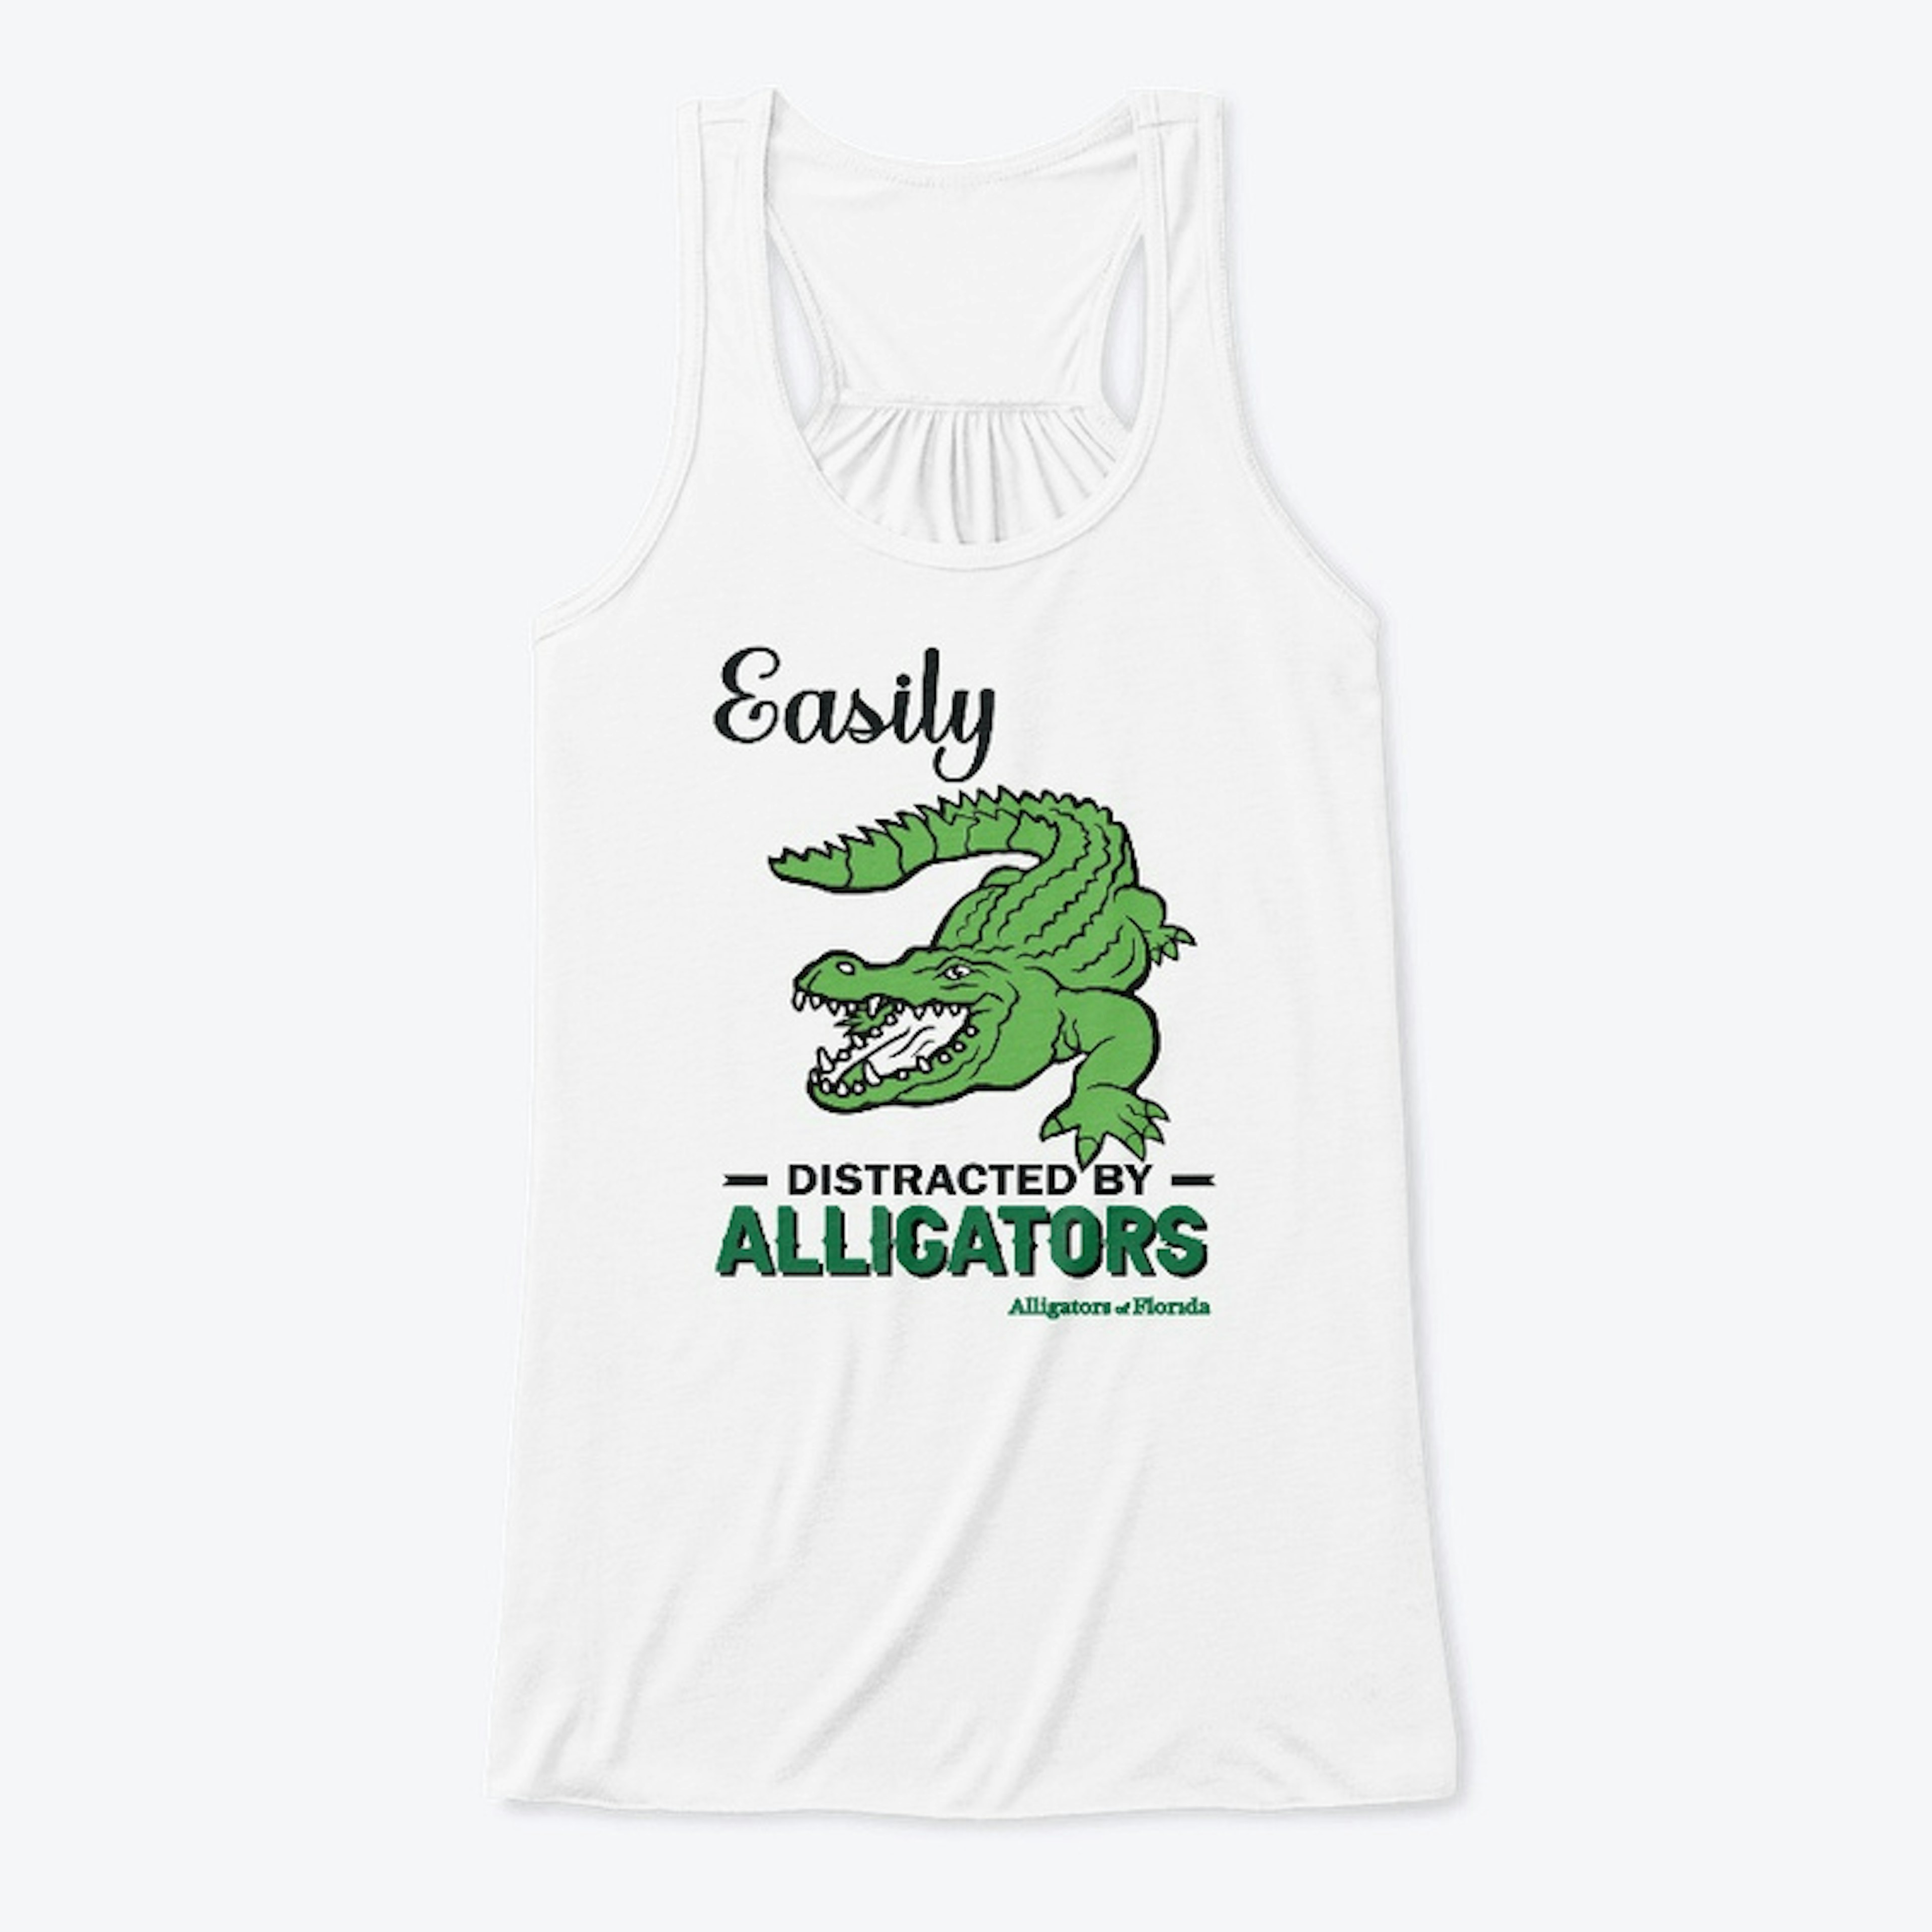 Easily Distracted by Alligators